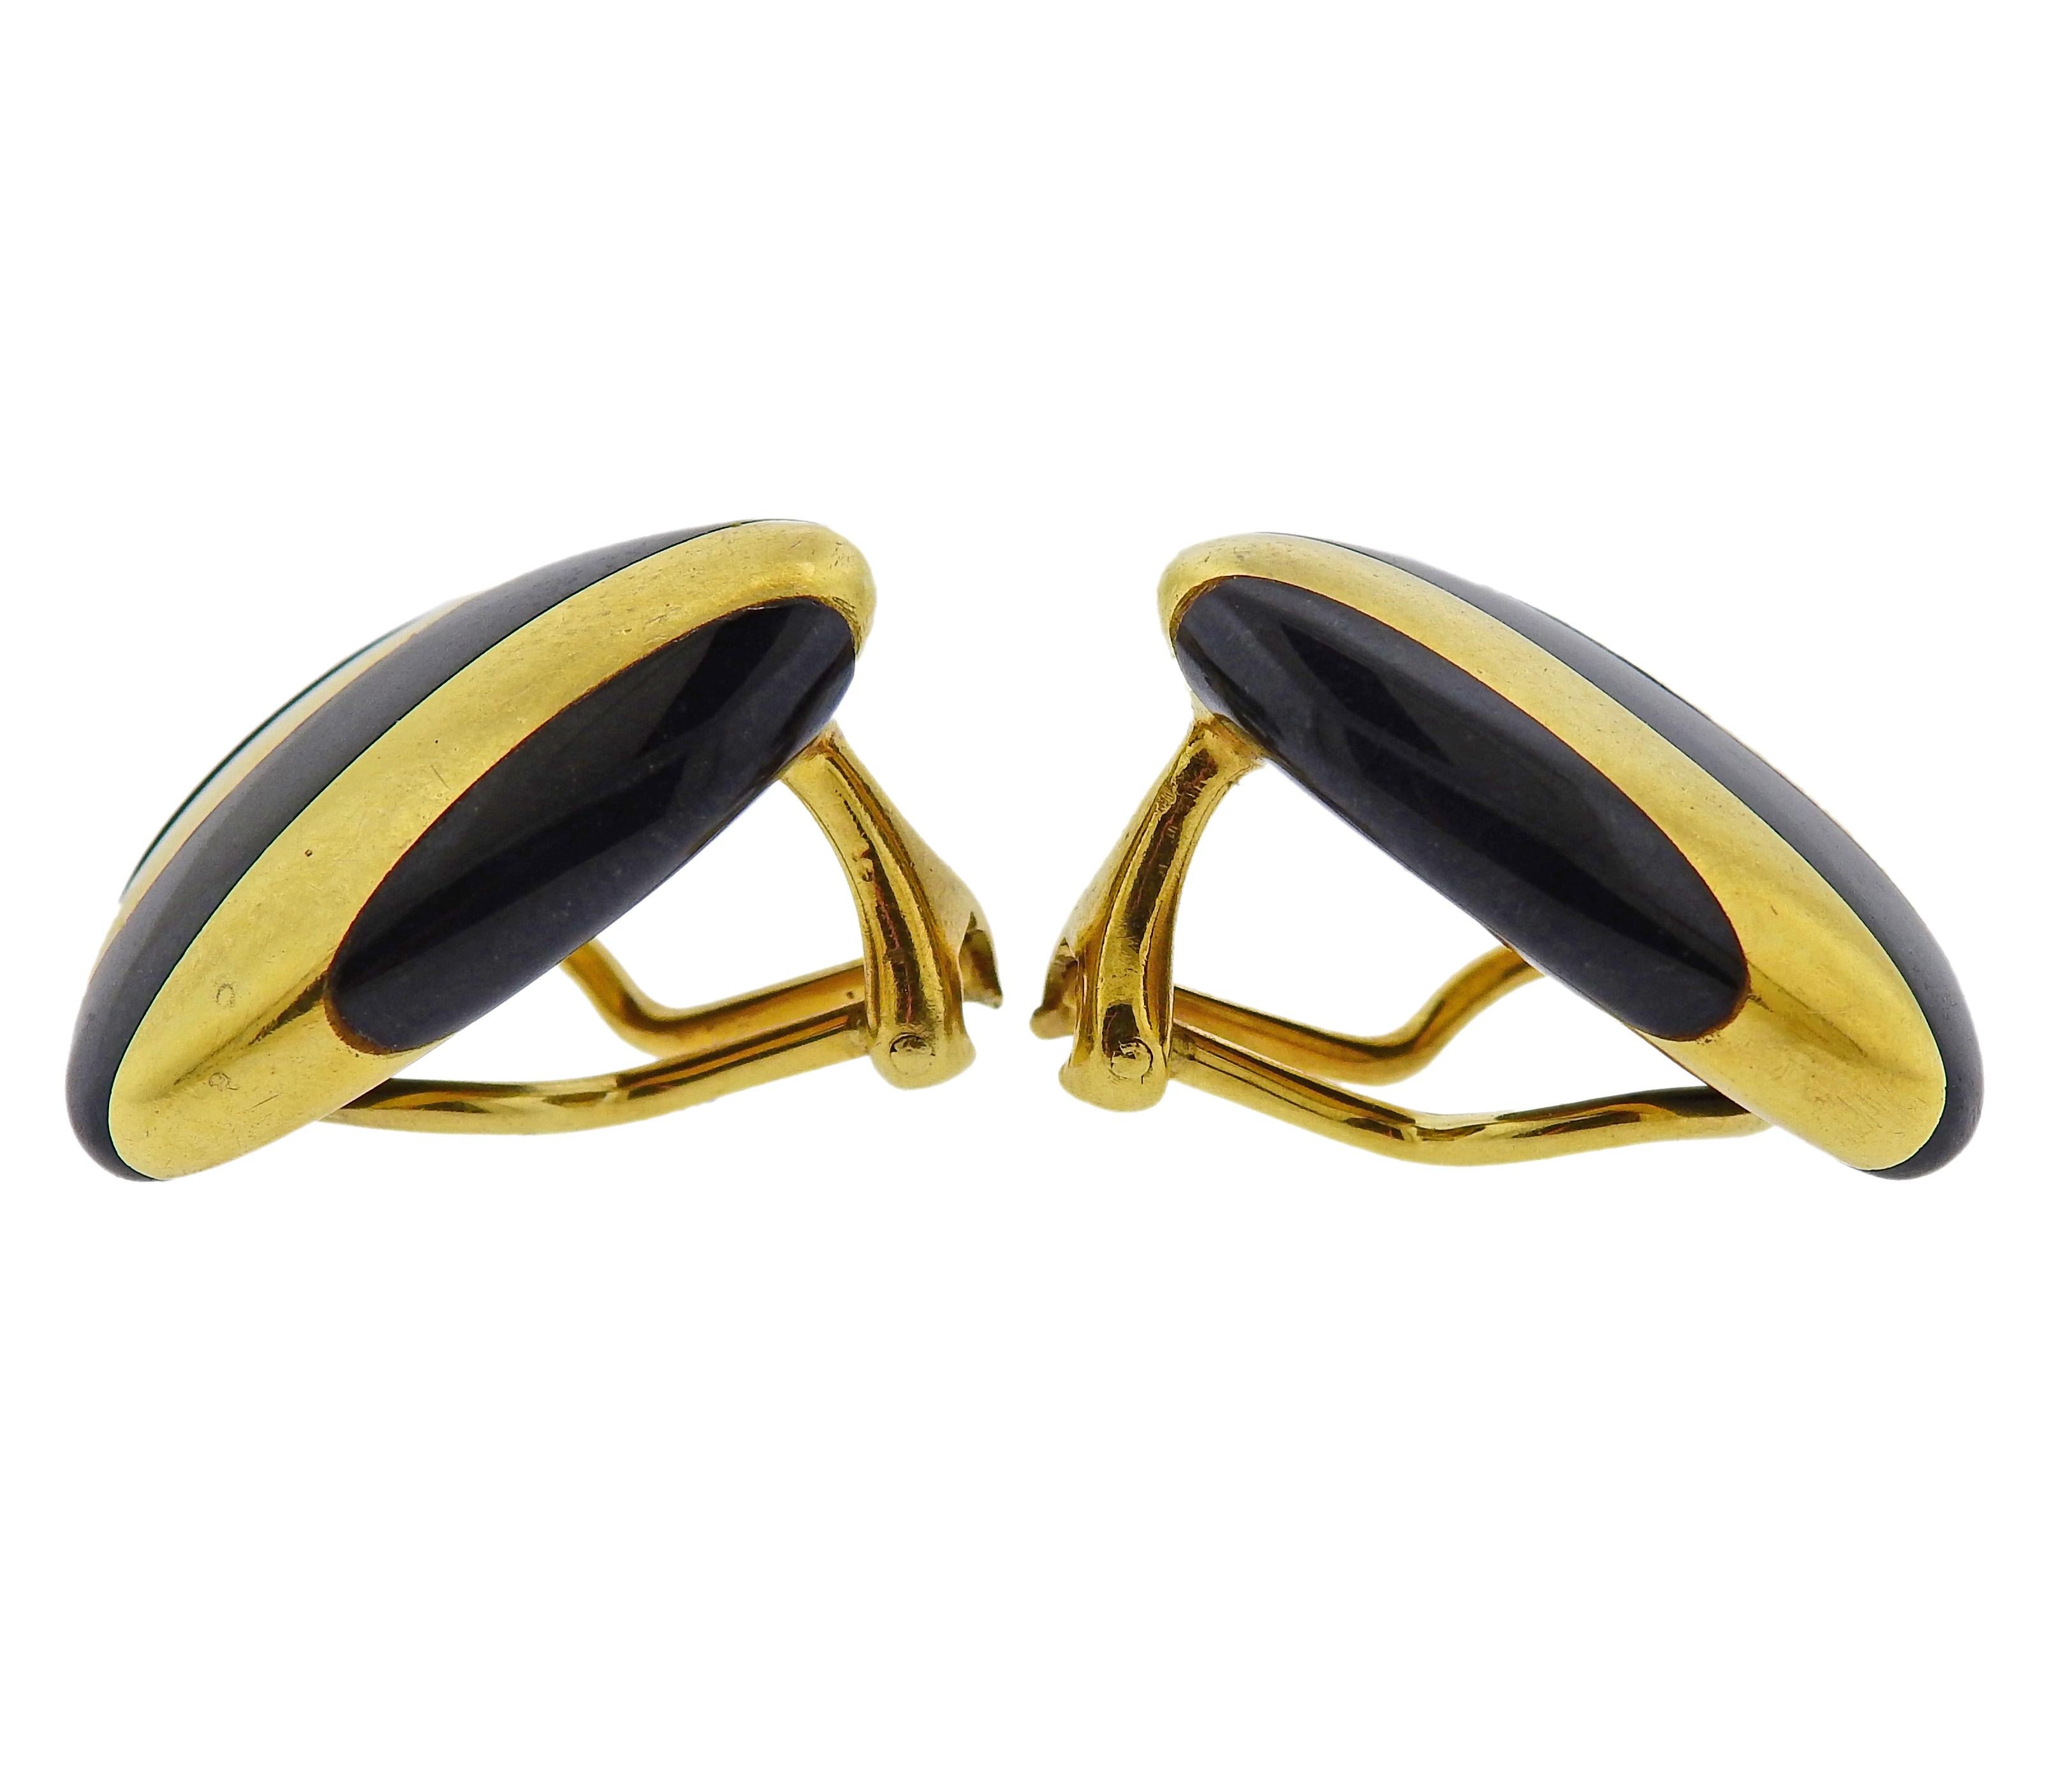 Pair of vintage 18k gold triangle earrings by Tiffany & Co, set with black jade inlay stripes. Measure 22mm x 19mm. Marked T & Co, C, 18k. Weigh 15.7 grams.

SKU#E-02996